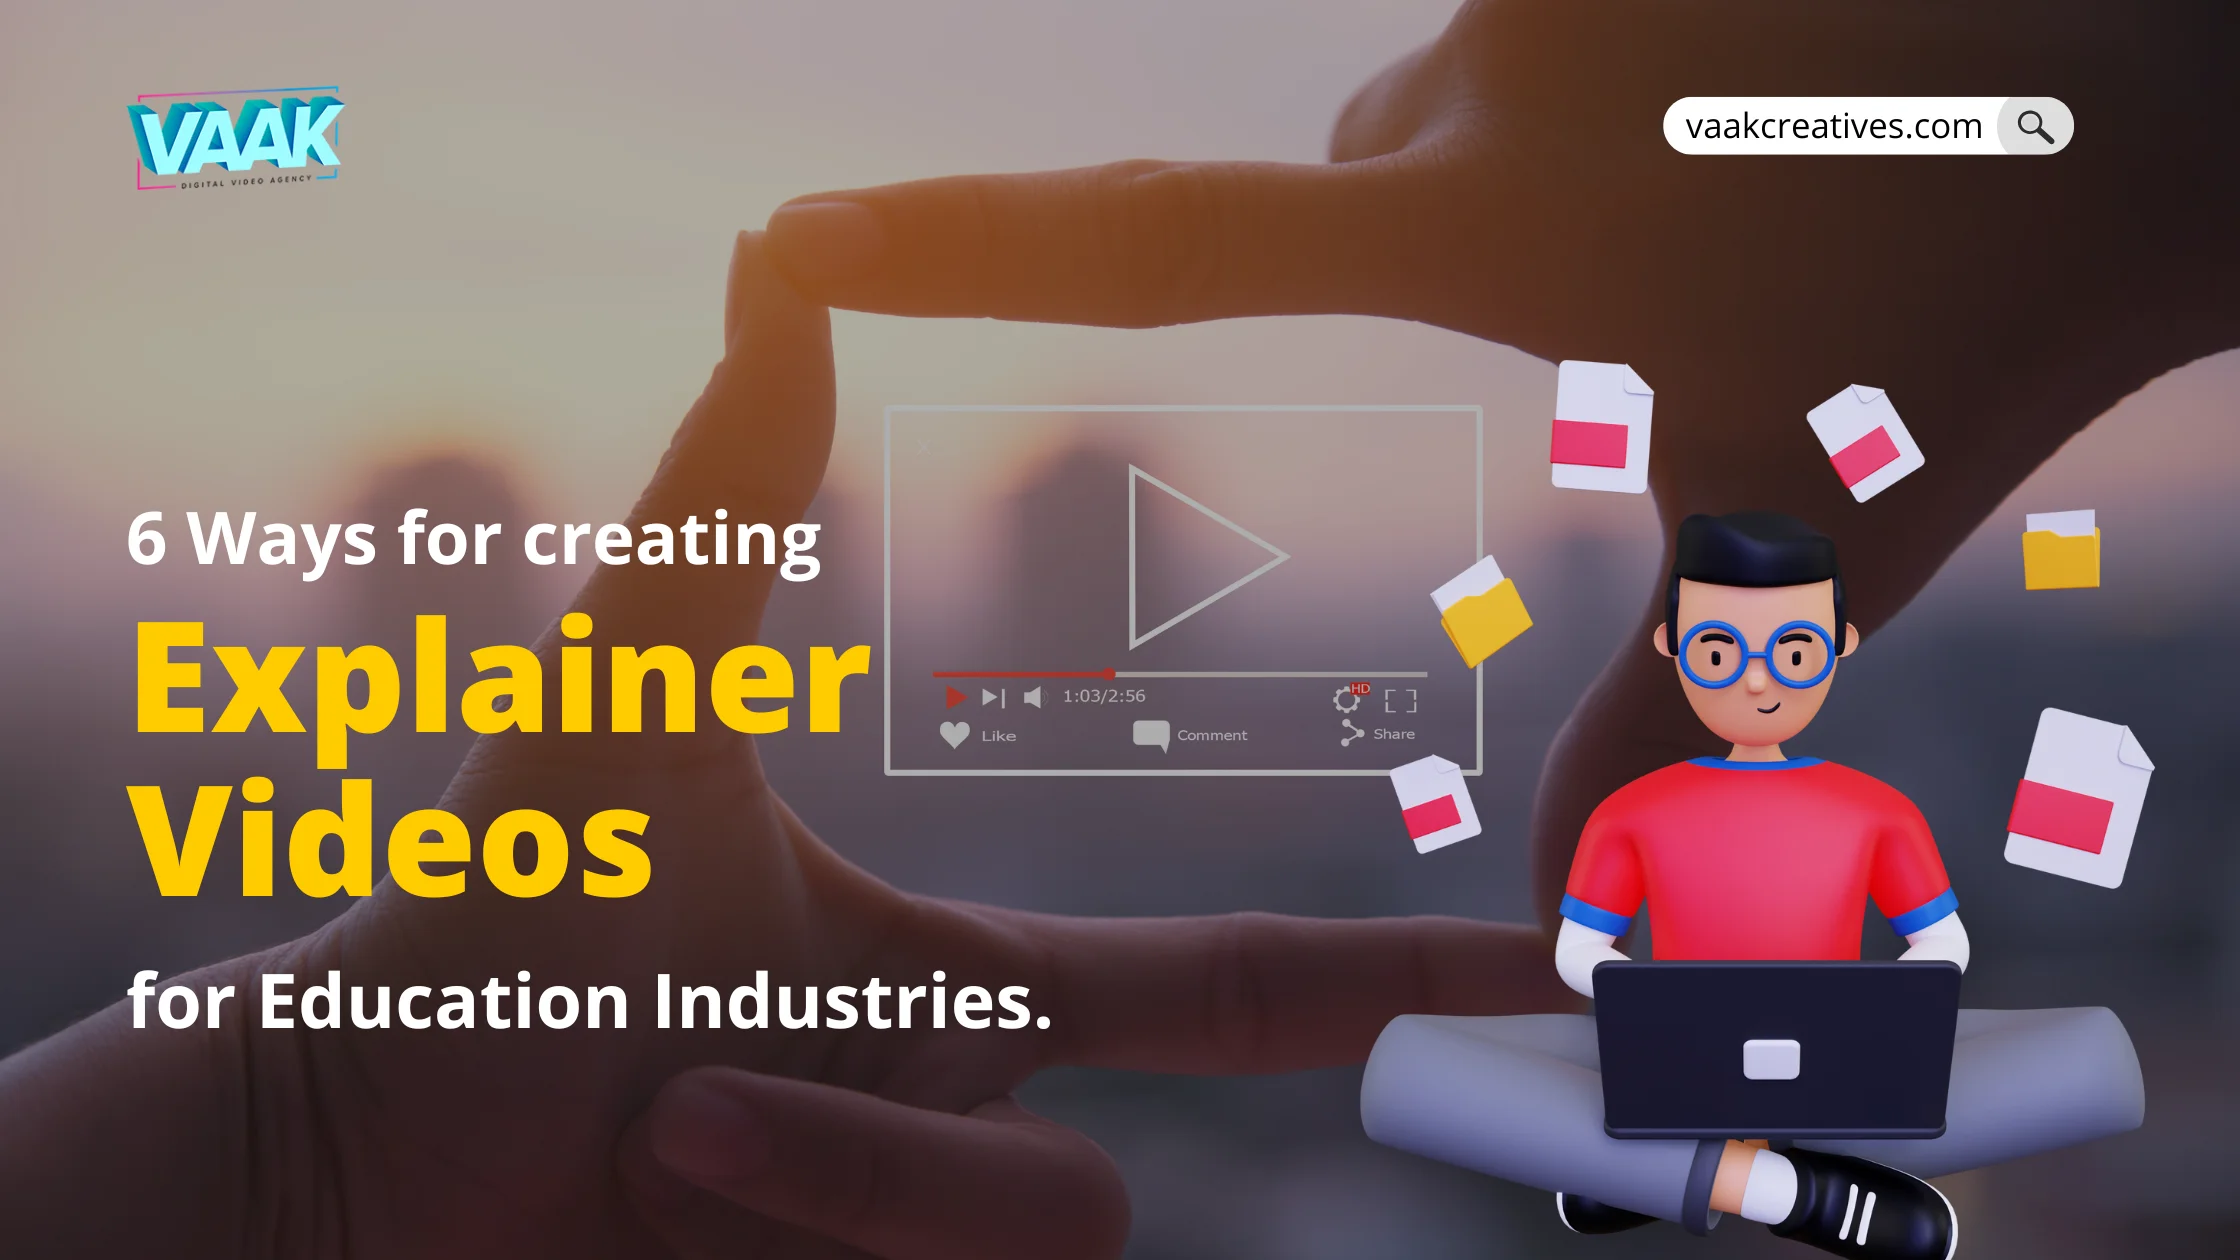 blog/6_Ways_for_Creating_Explainer_Videos_for_the_Education_Industry_Image_yrHNEzs.webp